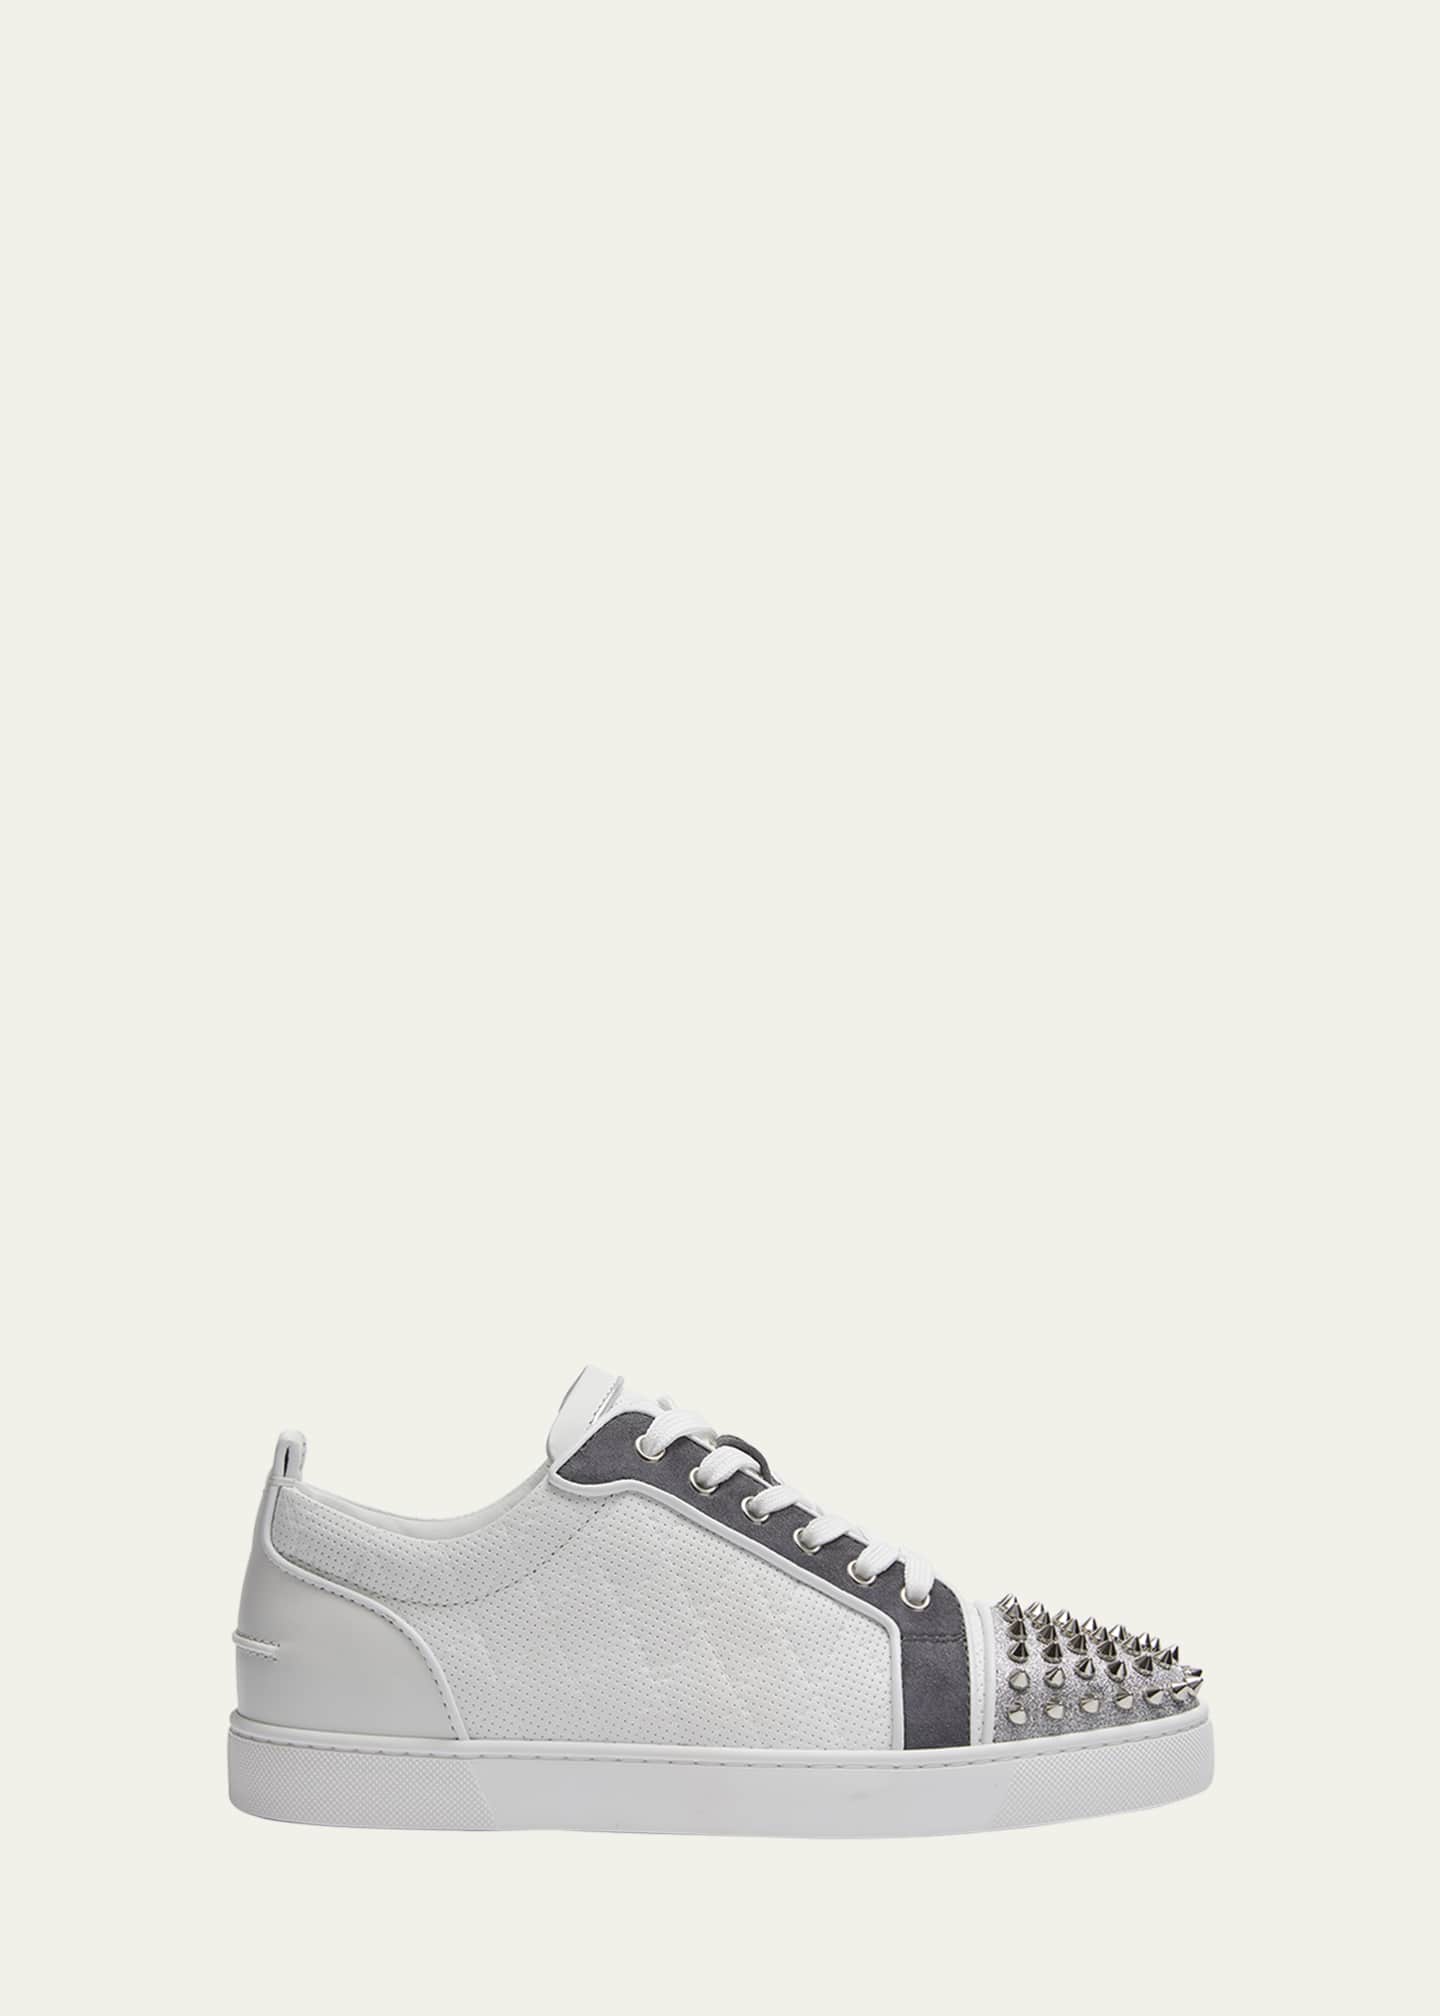 Christian Louboutin Men's Louis Junior Spikes Leather Sneakers